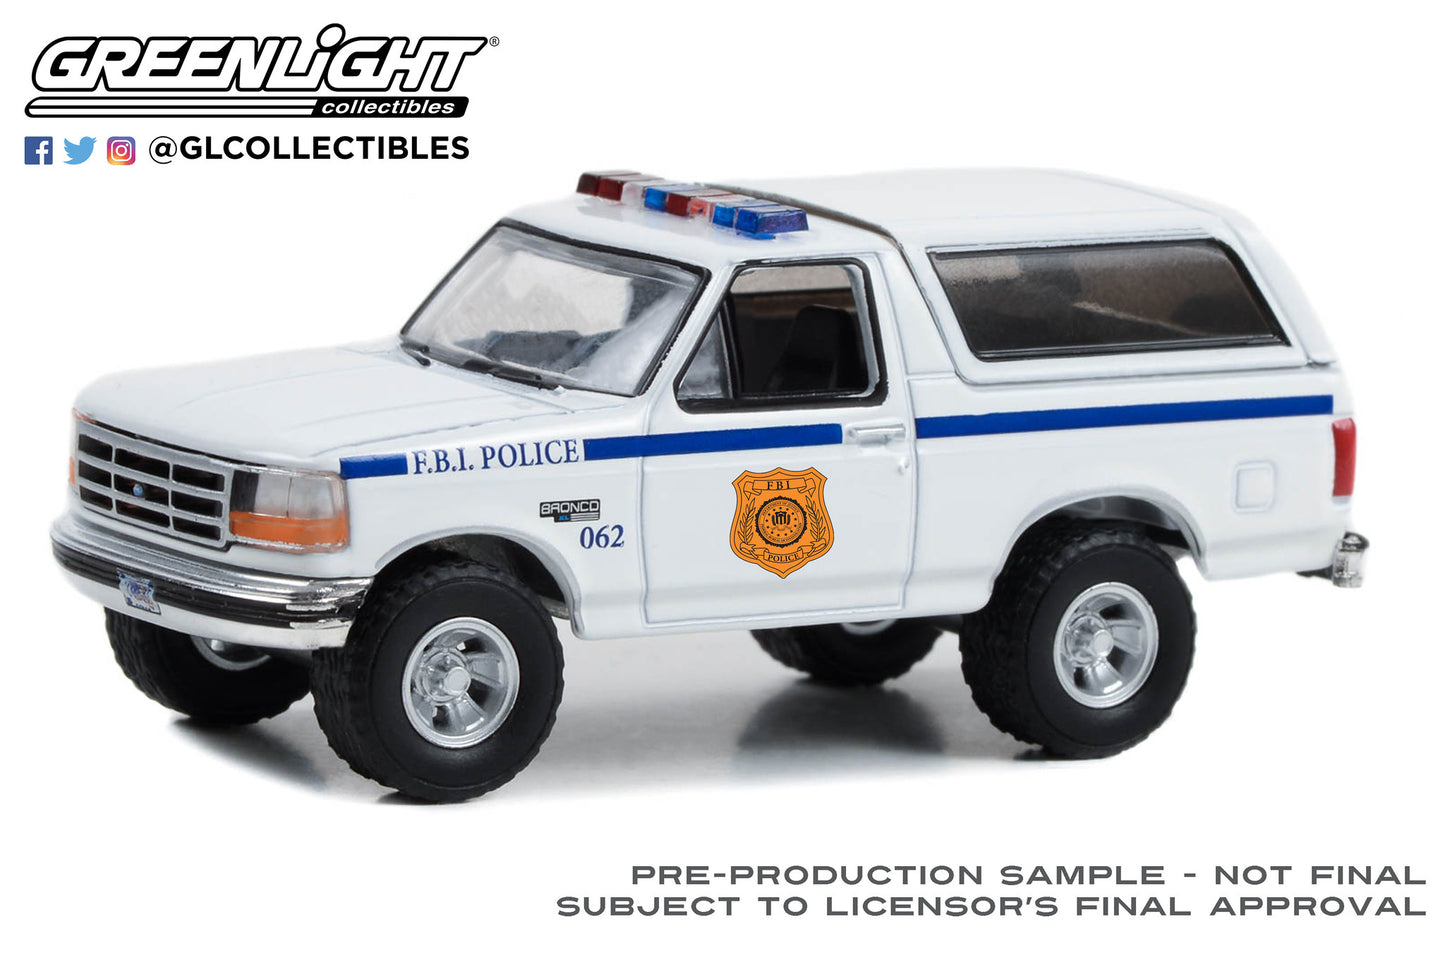 GreenLight 1:64 Hot Pursuit Special Edition - FBI Police (Federal Bureau of Investigation Police) - 1996 Ford Bronco XL 43025-A